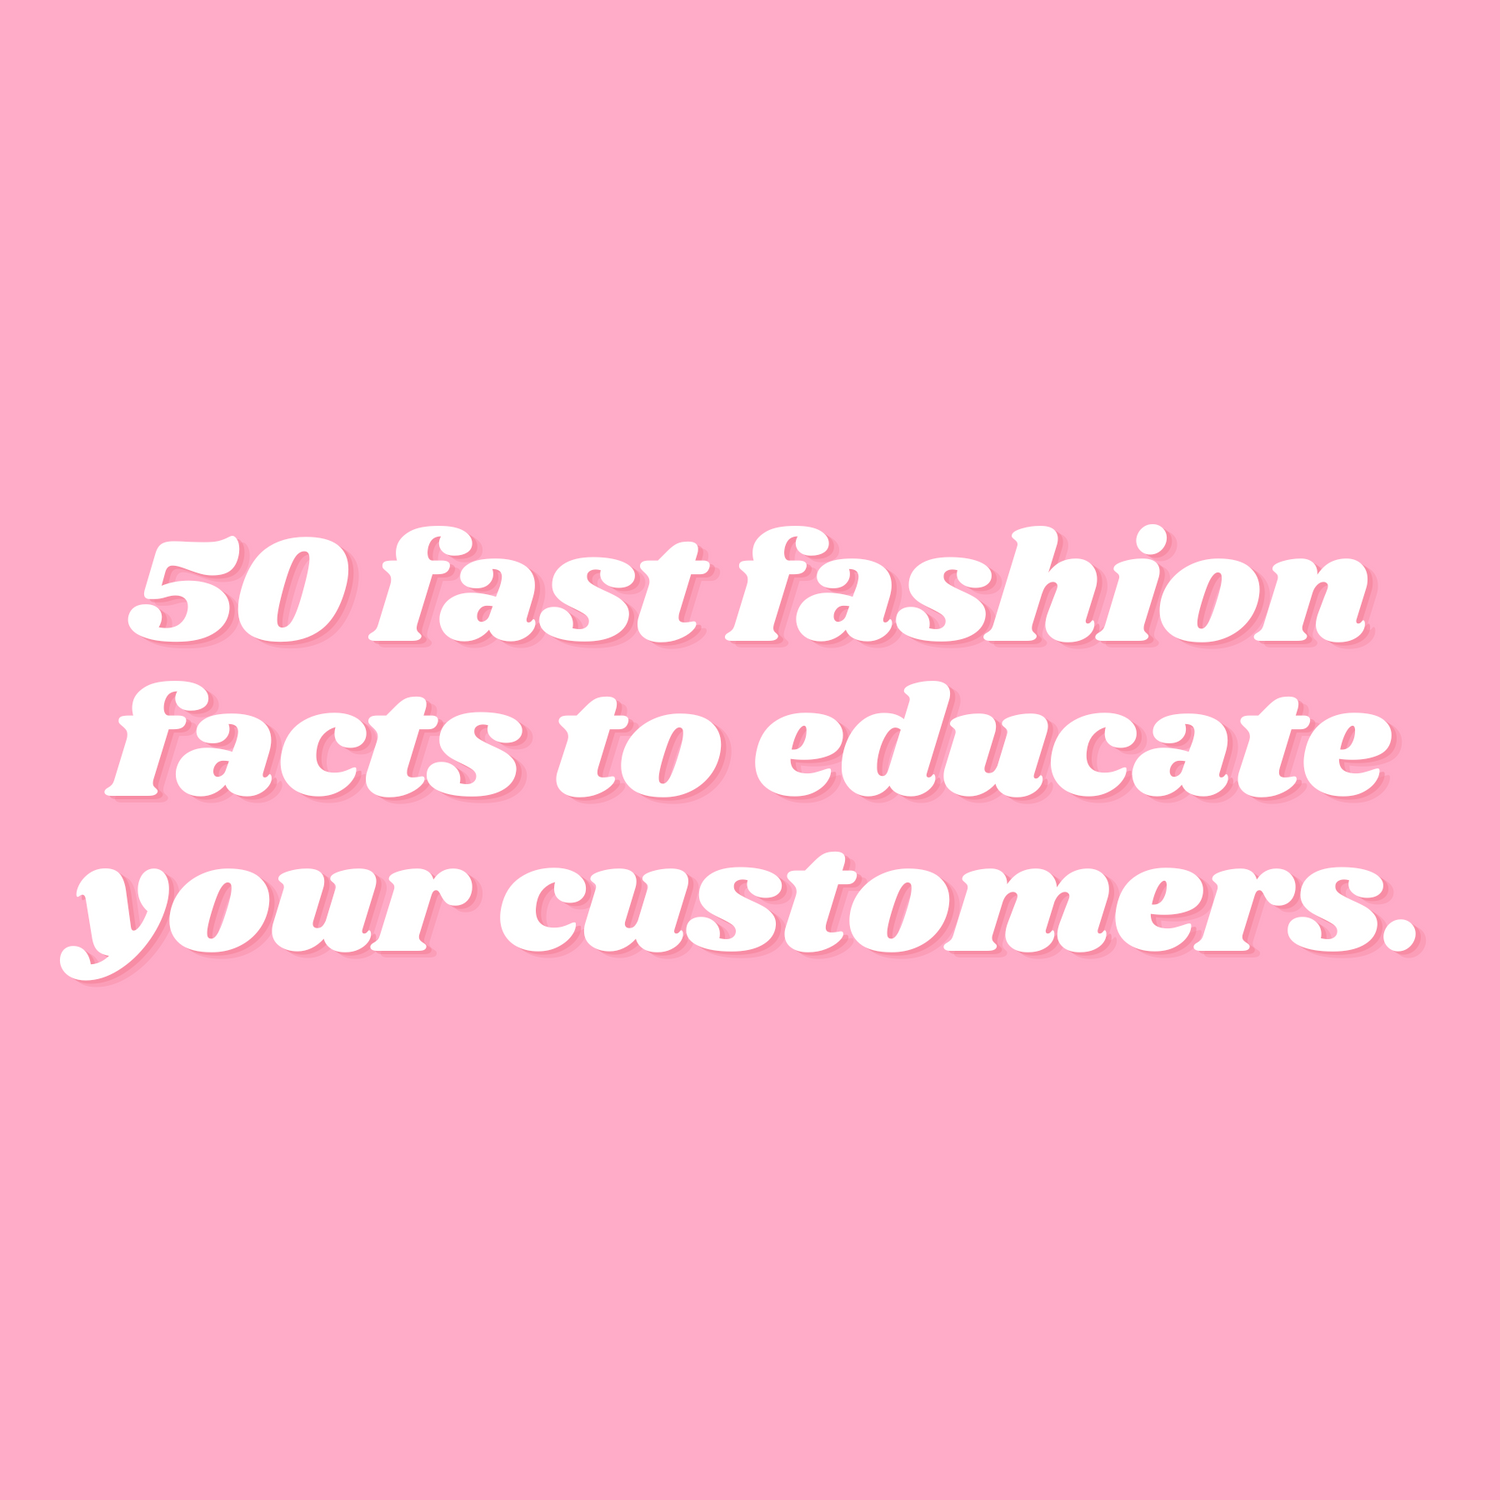 50 fast fashion facts and figures to share with your customers in 2023 The Fashion Advocate sustainable ethical fashion mentor coach